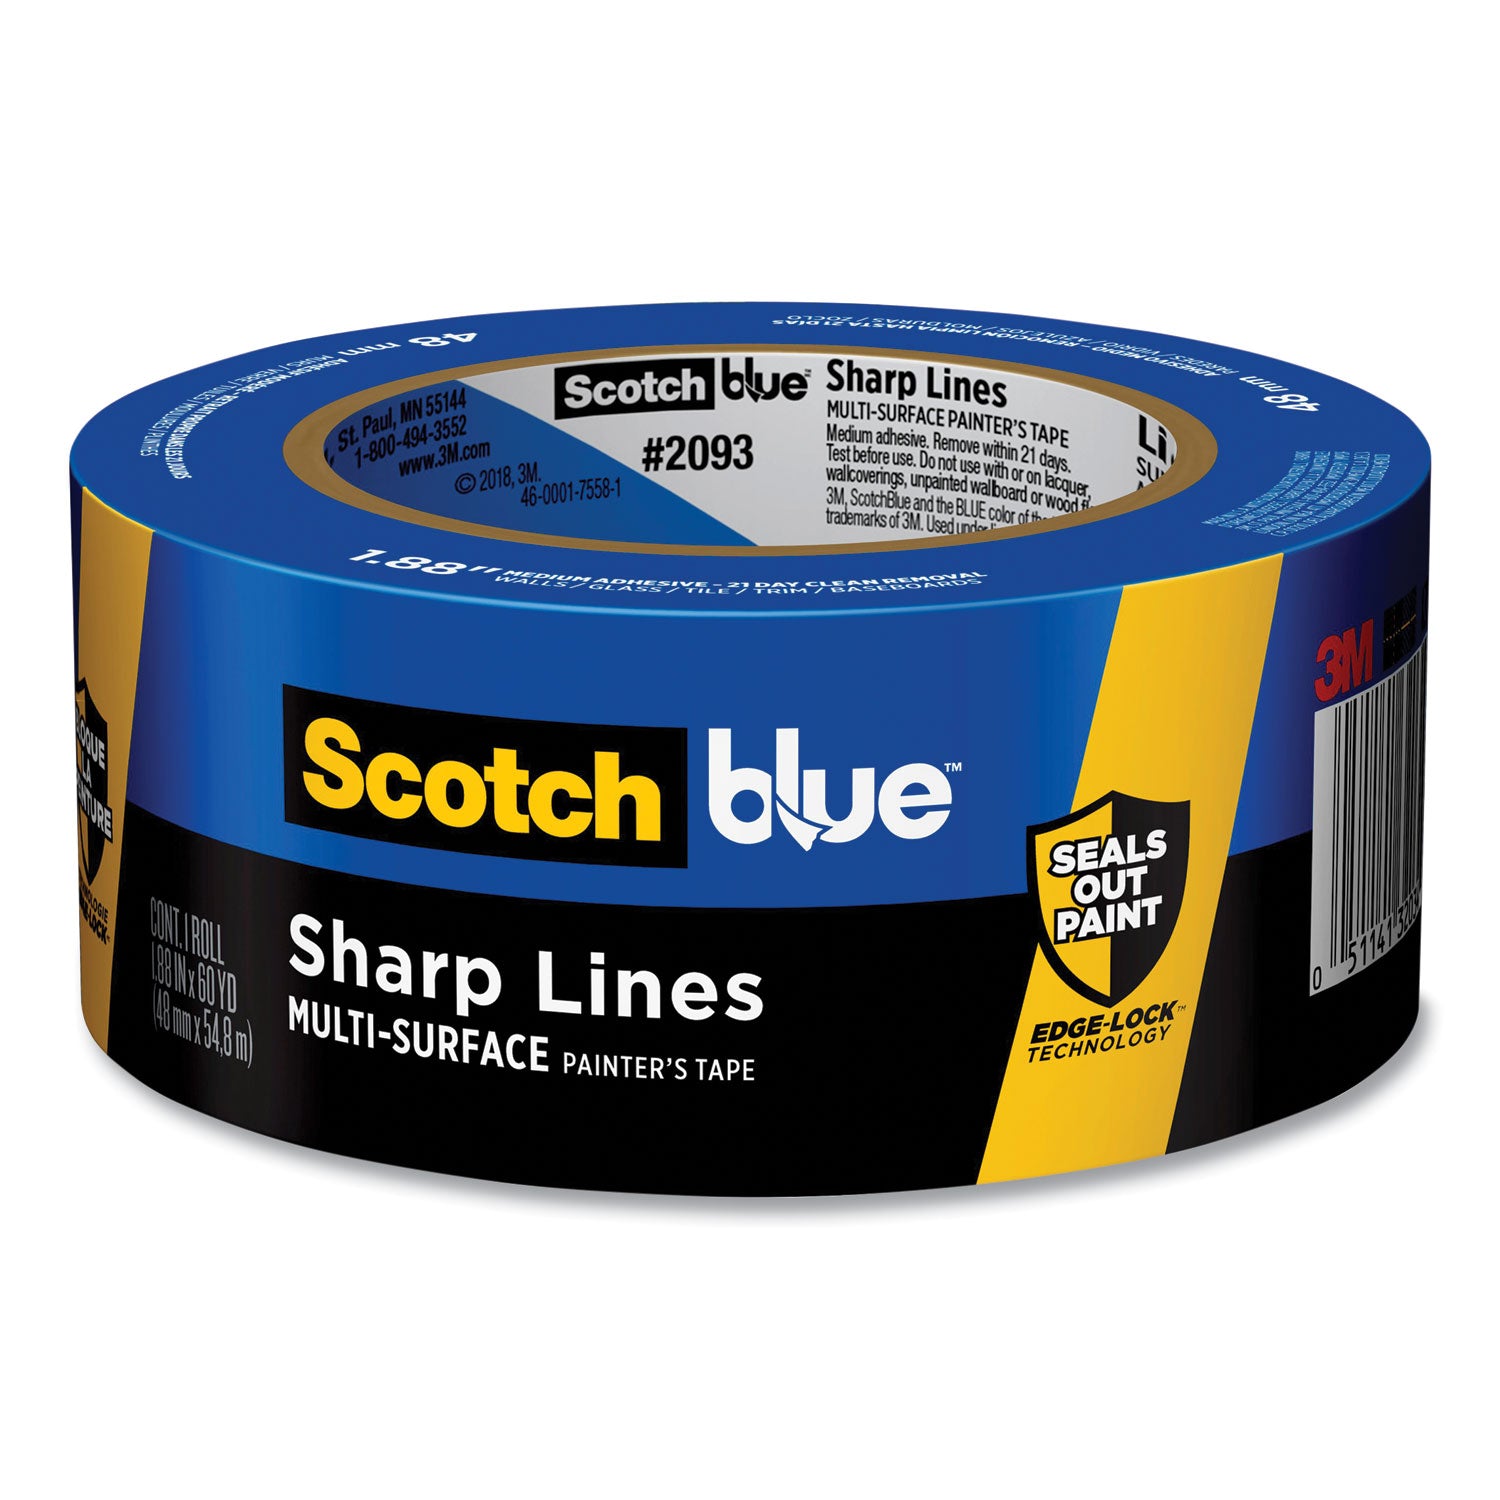 sharp-lines-multi-surface-painters-tape-3-core-188-x-60-yds-blue_mmm70006576063 - 1